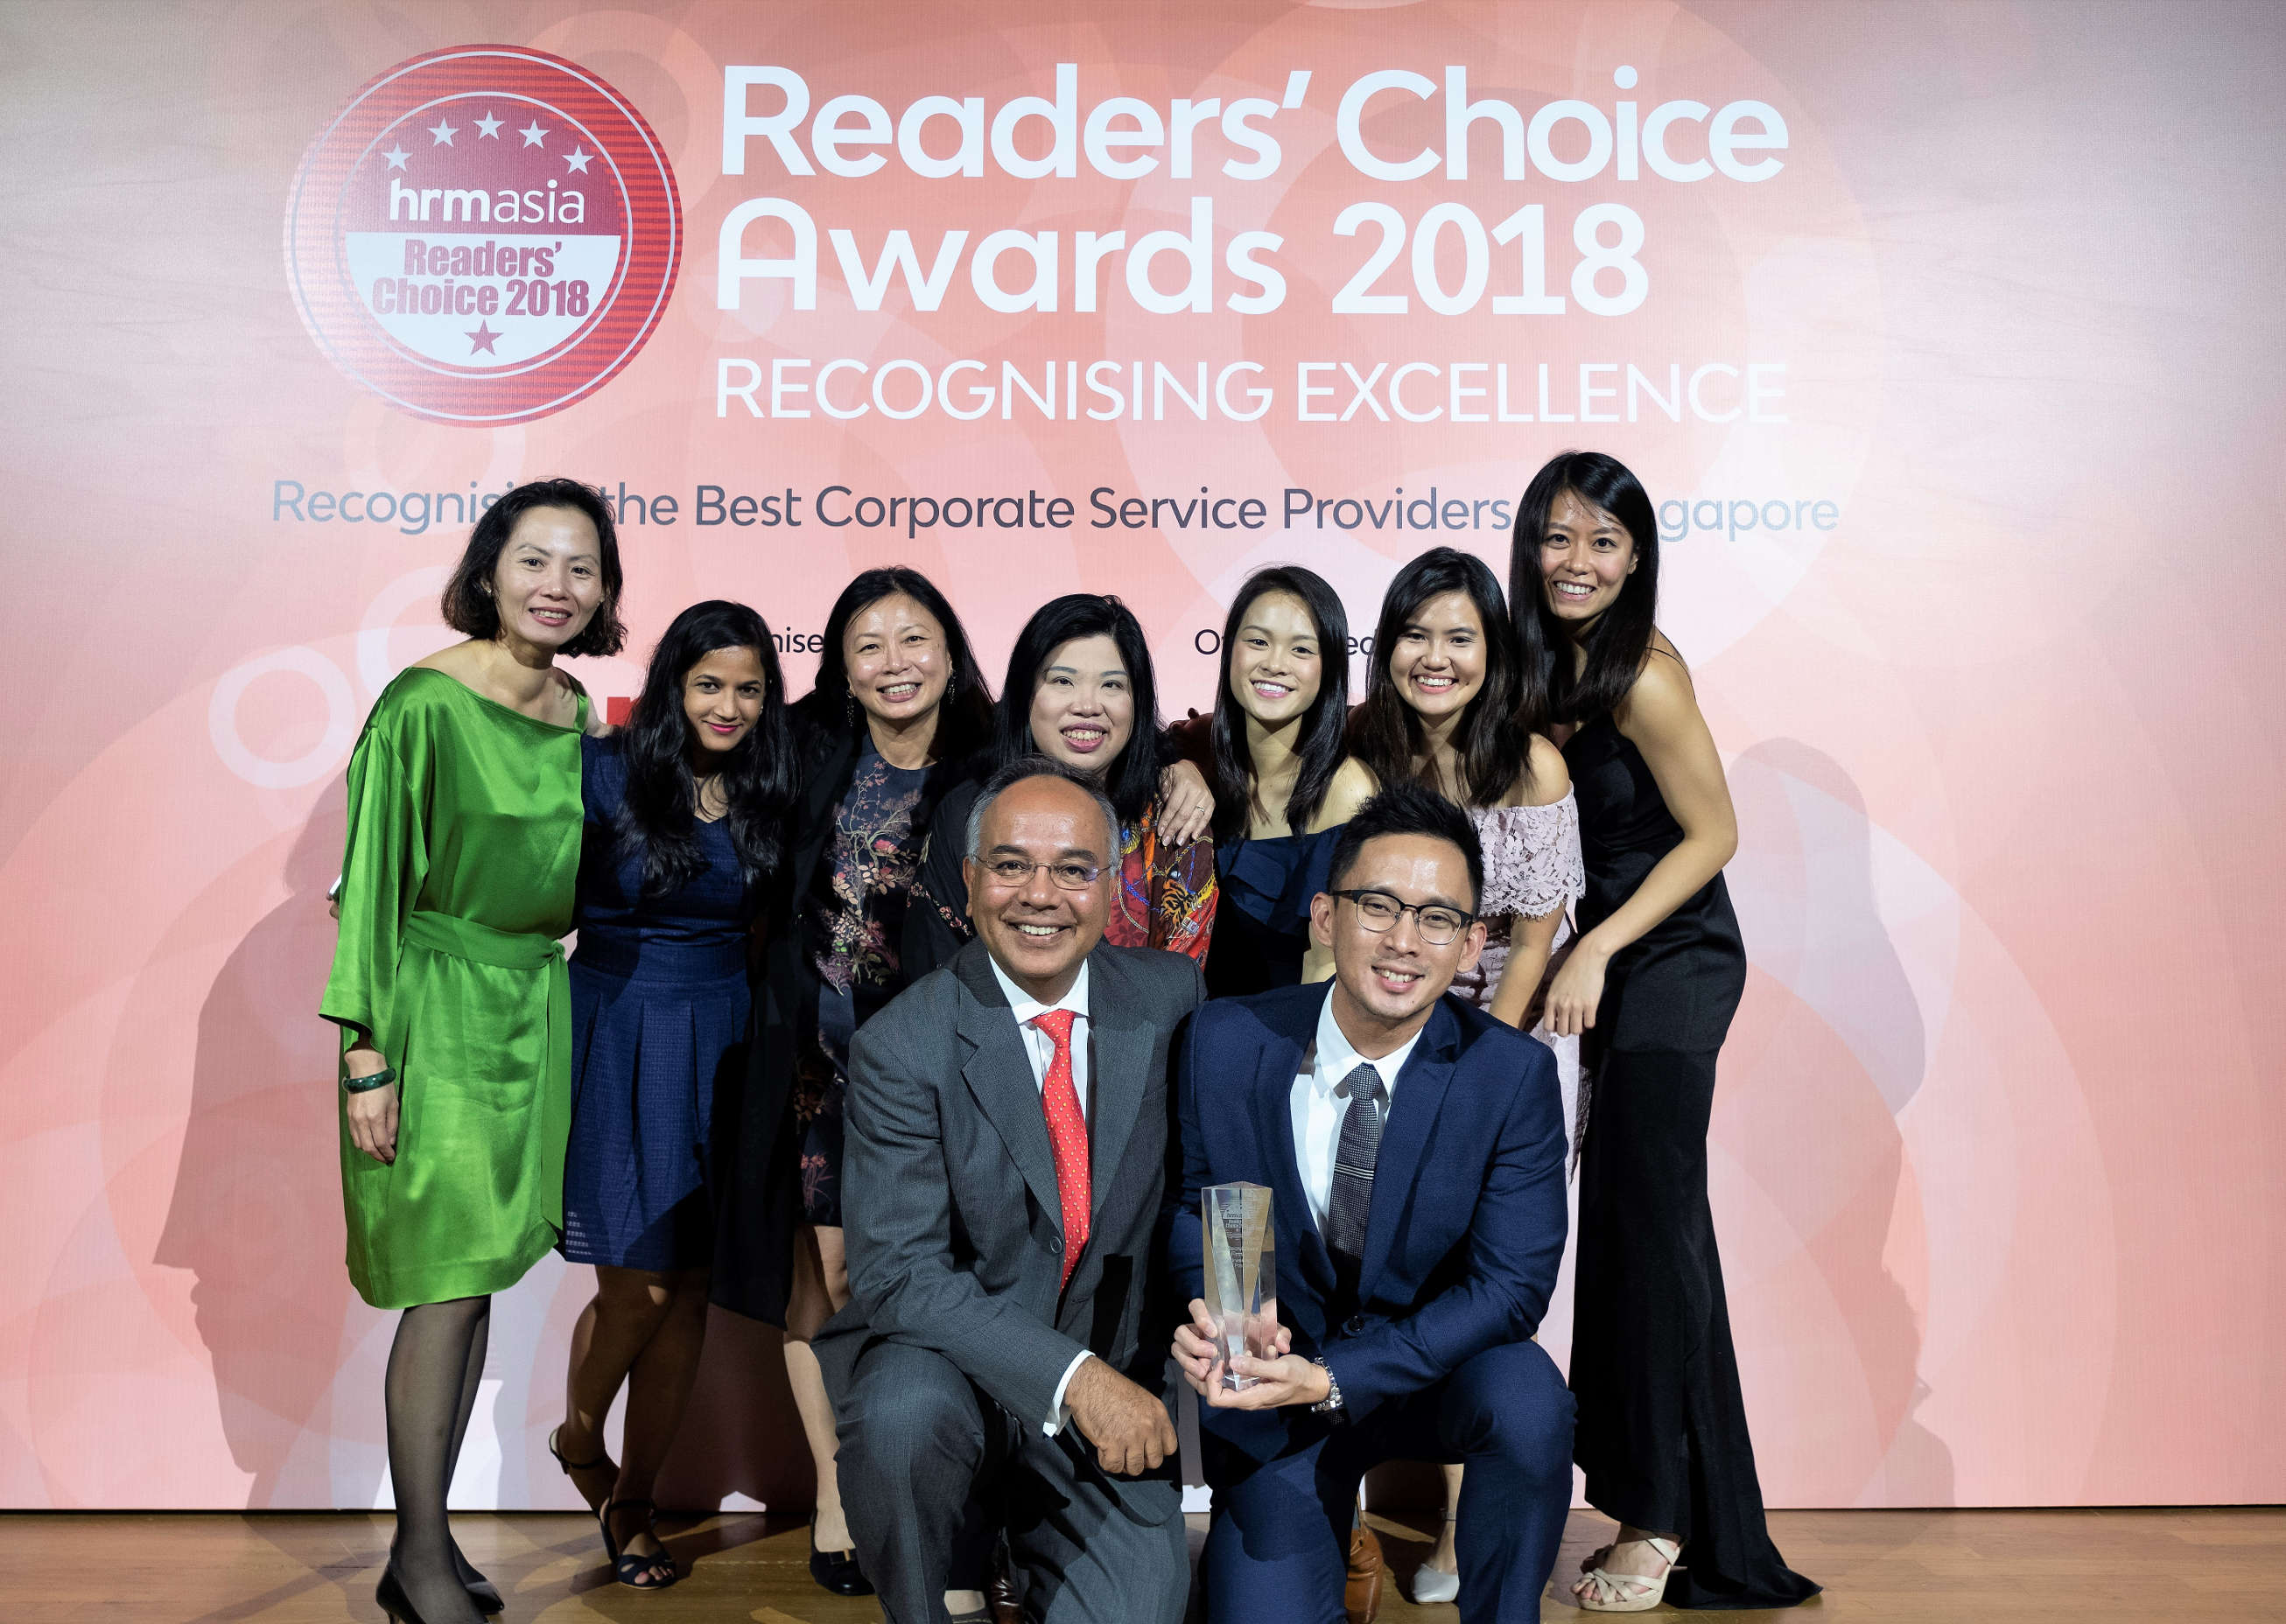 Sciente International Receives Readers Choice Award for The Best Recruitment Agency - Engineering & IT positions for the year 2018